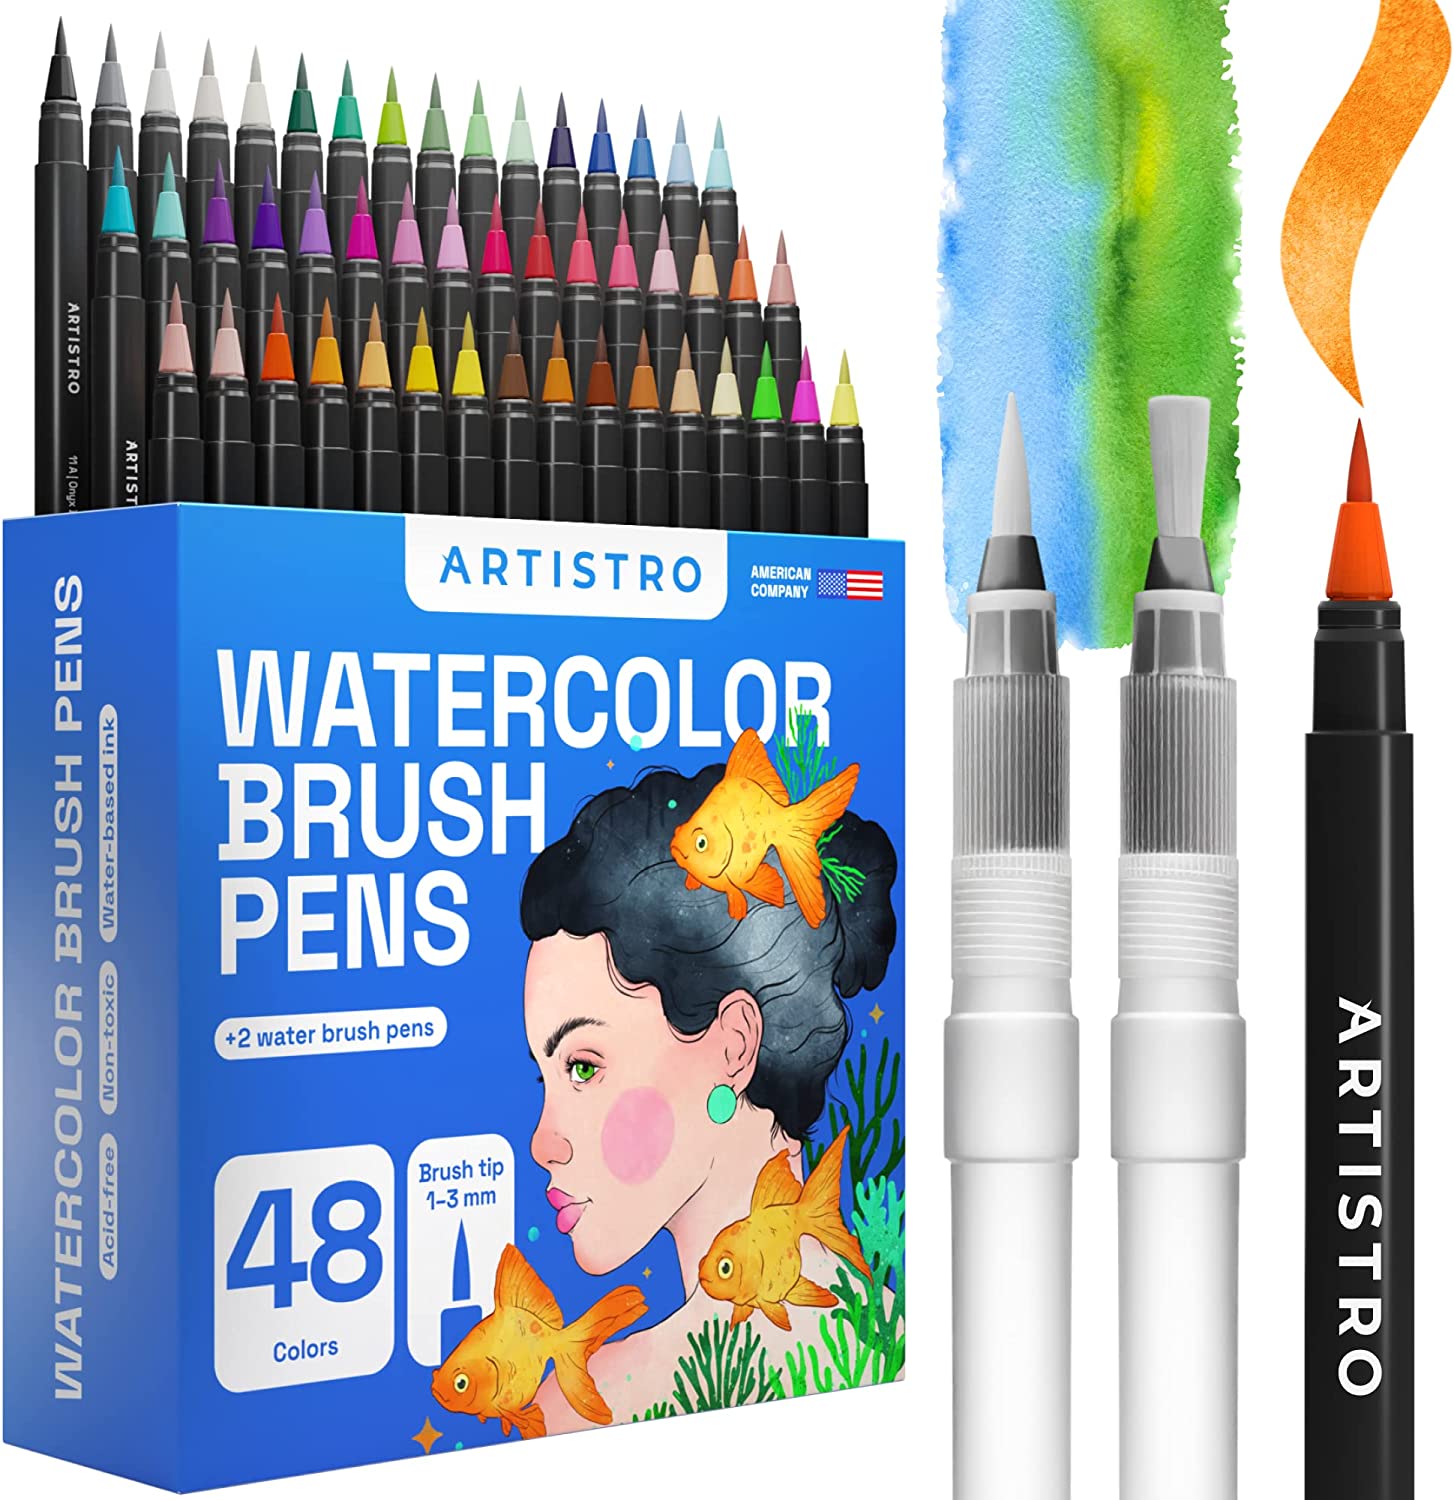 Pen Sets: Experience All the Colors, Inks, & Tip Sizes!